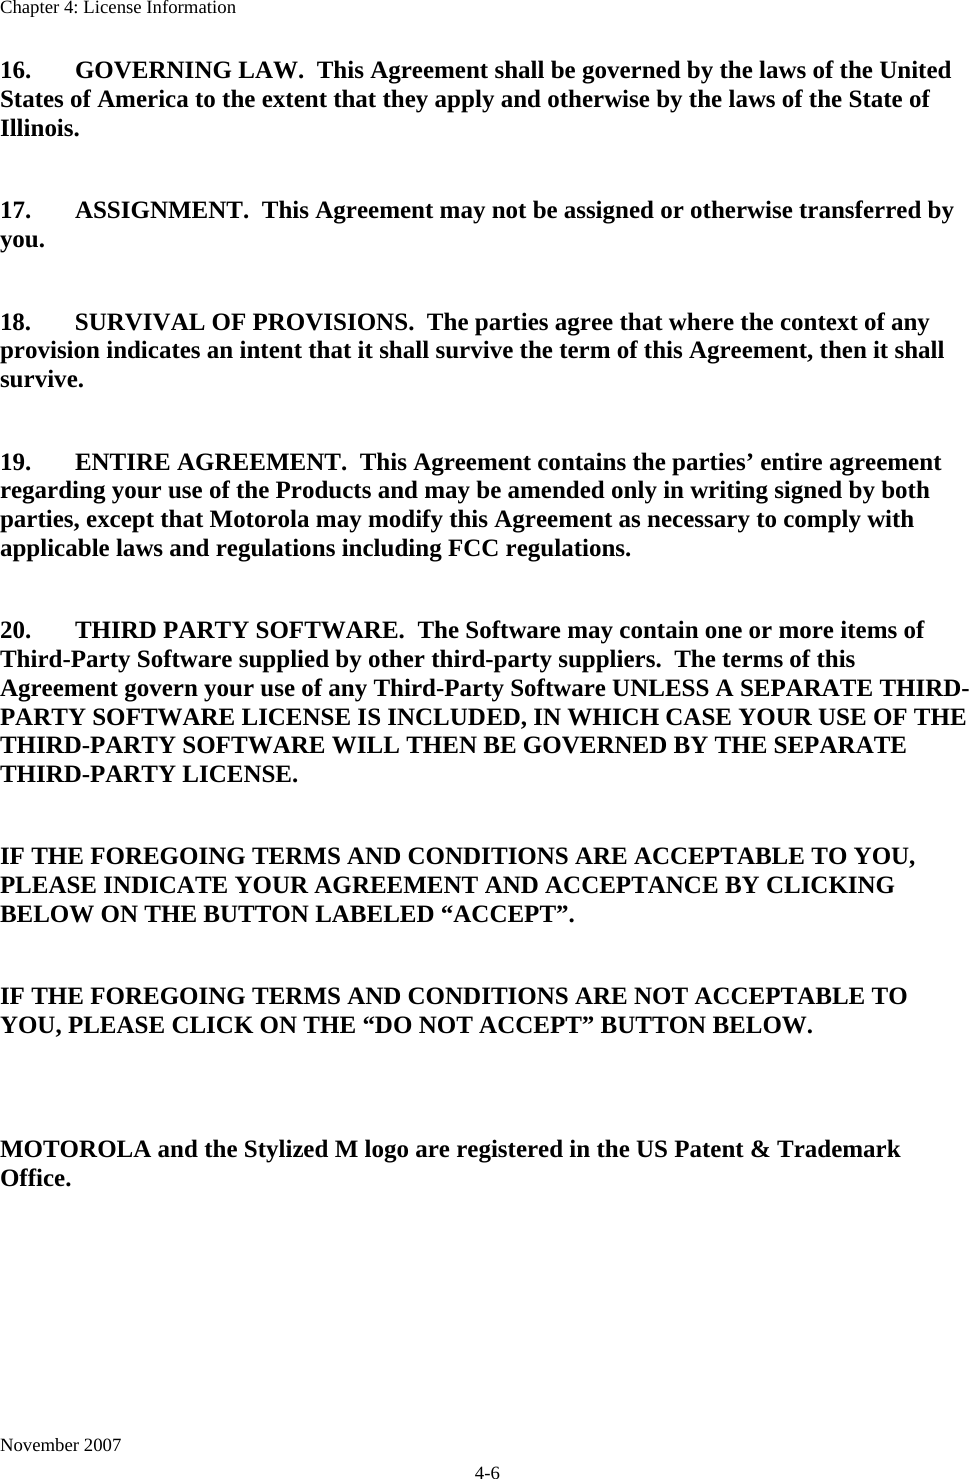 Chapter 4: License Information November 2007 4-6 16.  GOVERNING LAW.  This Agreement shall be governed by the laws of the United States of America to the extent that they apply and otherwise by the laws of the State of Illinois.  17.  ASSIGNMENT.  This Agreement may not be assigned or otherwise transferred by you.  18.  SURVIVAL OF PROVISIONS.  The parties agree that where the context of any provision indicates an intent that it shall survive the term of this Agreement, then it shall survive.  19.  ENTIRE AGREEMENT.  This Agreement contains the parties’ entire agreement regarding your use of the Products and may be amended only in writing signed by both parties, except that Motorola may modify this Agreement as necessary to comply with applicable laws and regulations including FCC regulations.  20.  THIRD PARTY SOFTWARE.  The Software may contain one or more items of Third-Party Software supplied by other third-party suppliers.  The terms of this Agreement govern your use of any Third-Party Software UNLESS A SEPARATE THIRD-PARTY SOFTWARE LICENSE IS INCLUDED, IN WHICH CASE YOUR USE OF THE THIRD-PARTY SOFTWARE WILL THEN BE GOVERNED BY THE SEPARATE THIRD-PARTY LICENSE.  IF THE FOREGOING TERMS AND CONDITIONS ARE ACCEPTABLE TO YOU, PLEASE INDICATE YOUR AGREEMENT AND ACCEPTANCE BY CLICKING BELOW ON THE BUTTON LABELED “ACCEPT”.  IF THE FOREGOING TERMS AND CONDITIONS ARE NOT ACCEPTABLE TO YOU, PLEASE CLICK ON THE “DO NOT ACCEPT” BUTTON BELOW.   MOTOROLA and the Stylized M logo are registered in the US Patent &amp; Trademark Office.    